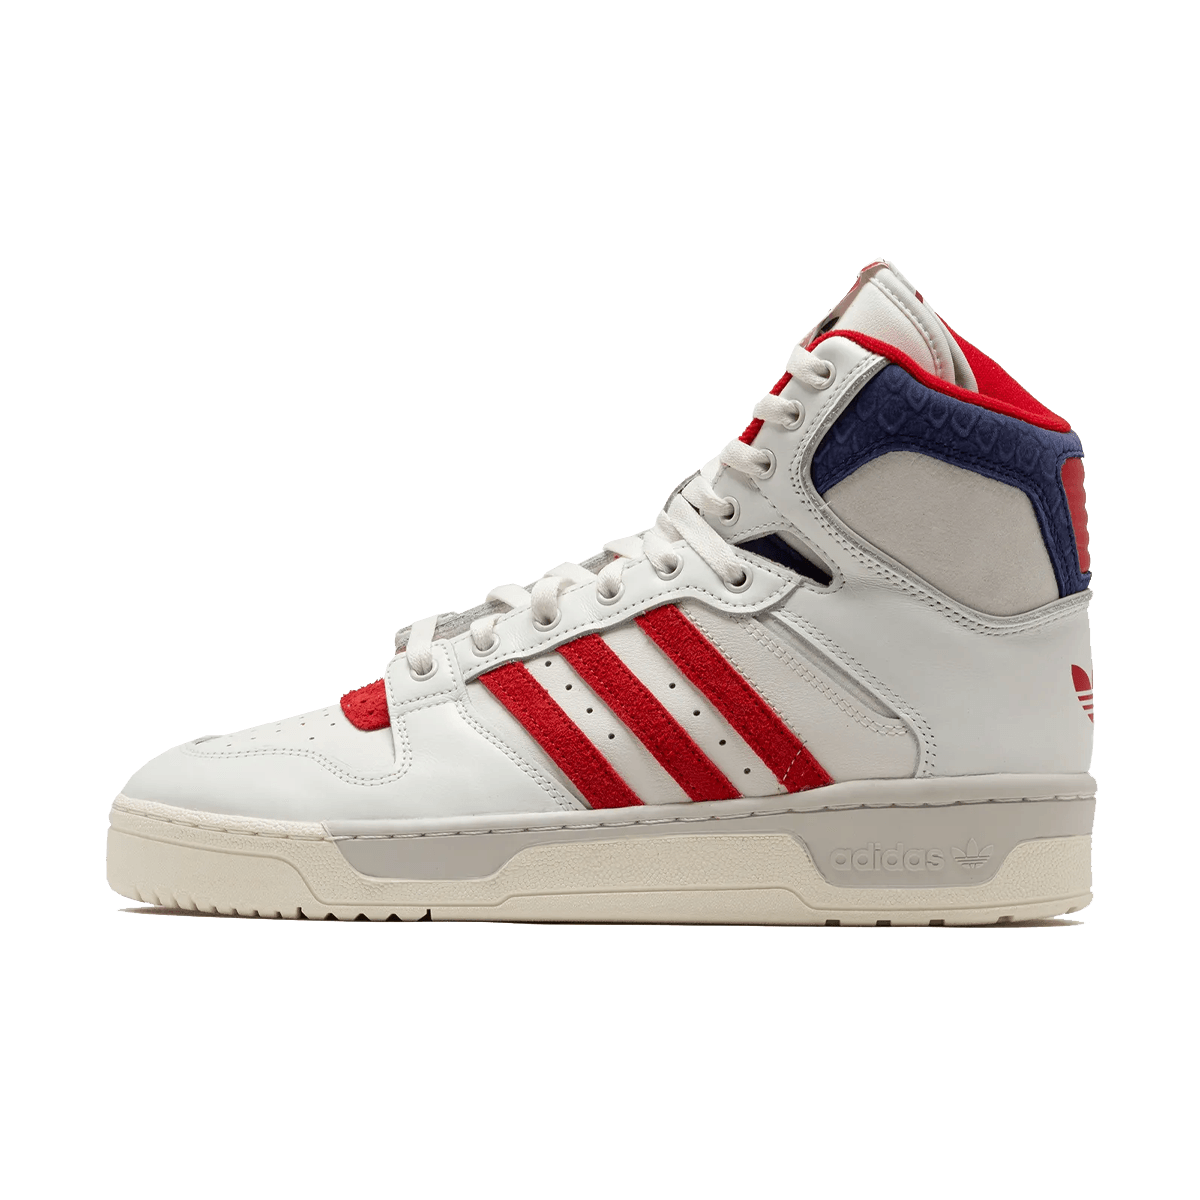 adidas Conductor Hi - The Collective Pack